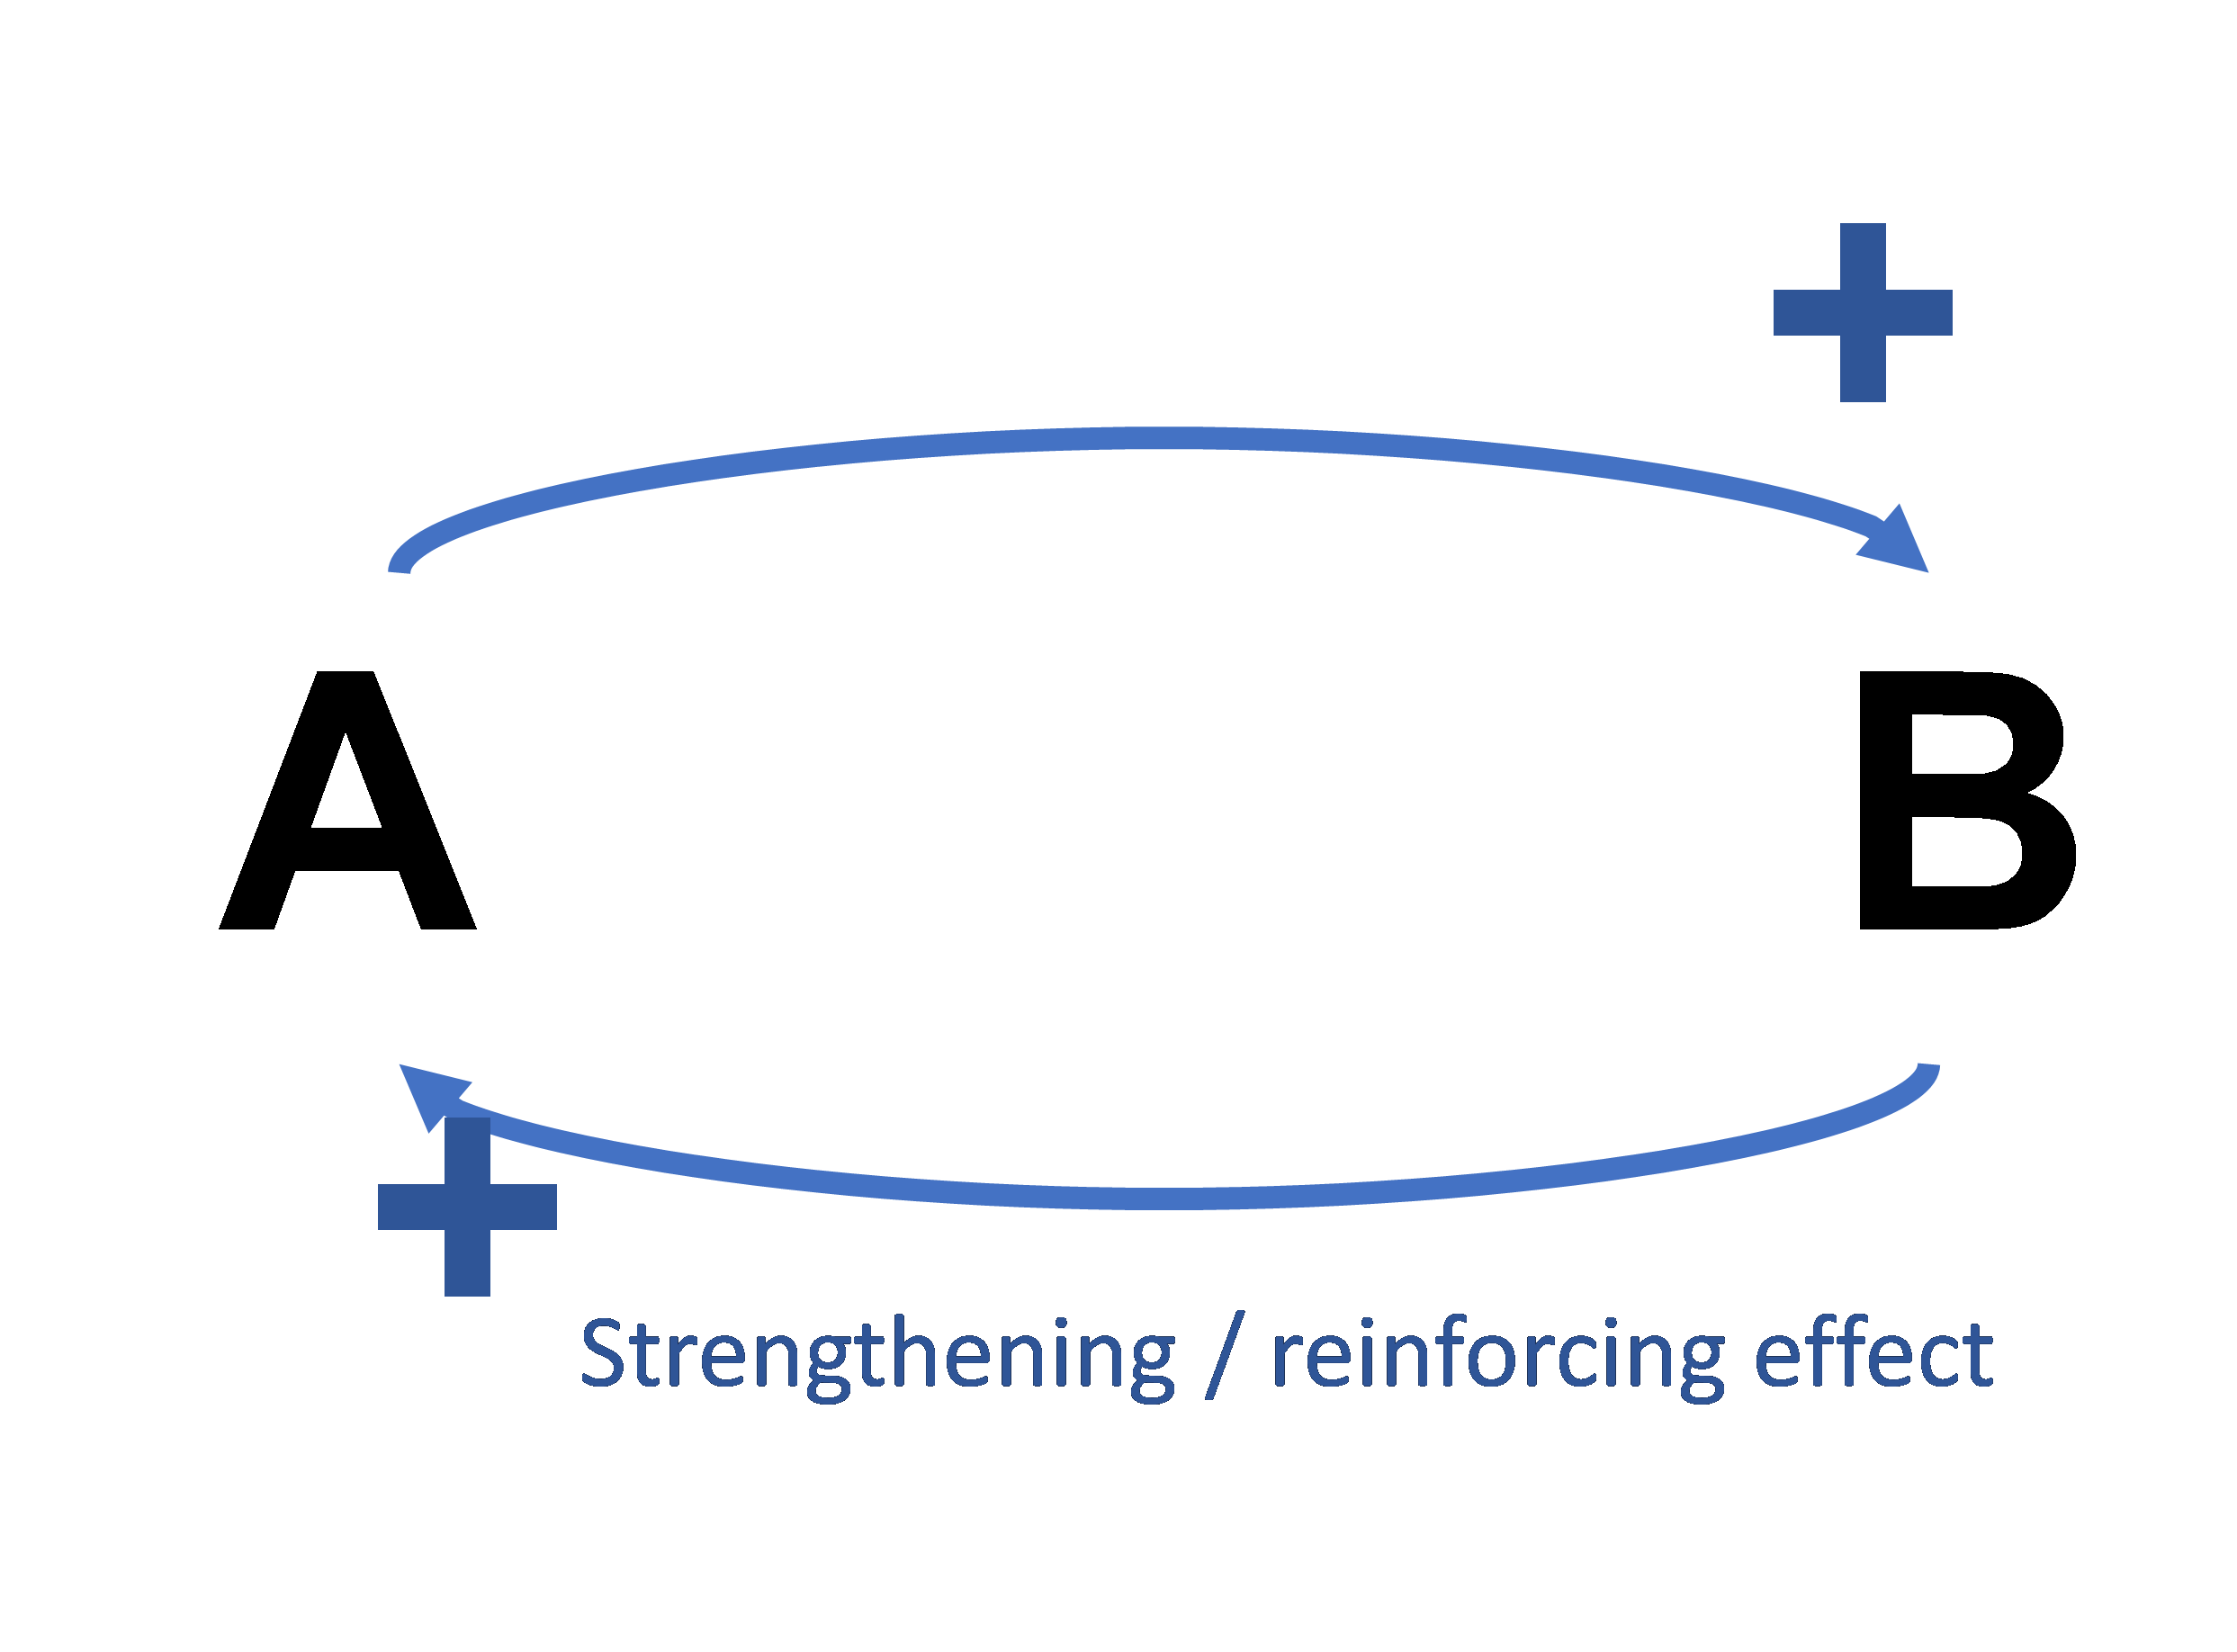 A diagram titled Strengthening/ Reinforcing effect that represents a positive feedback loop. A is linking to B via a positive arrow. B then links back to A via a positive arrow.